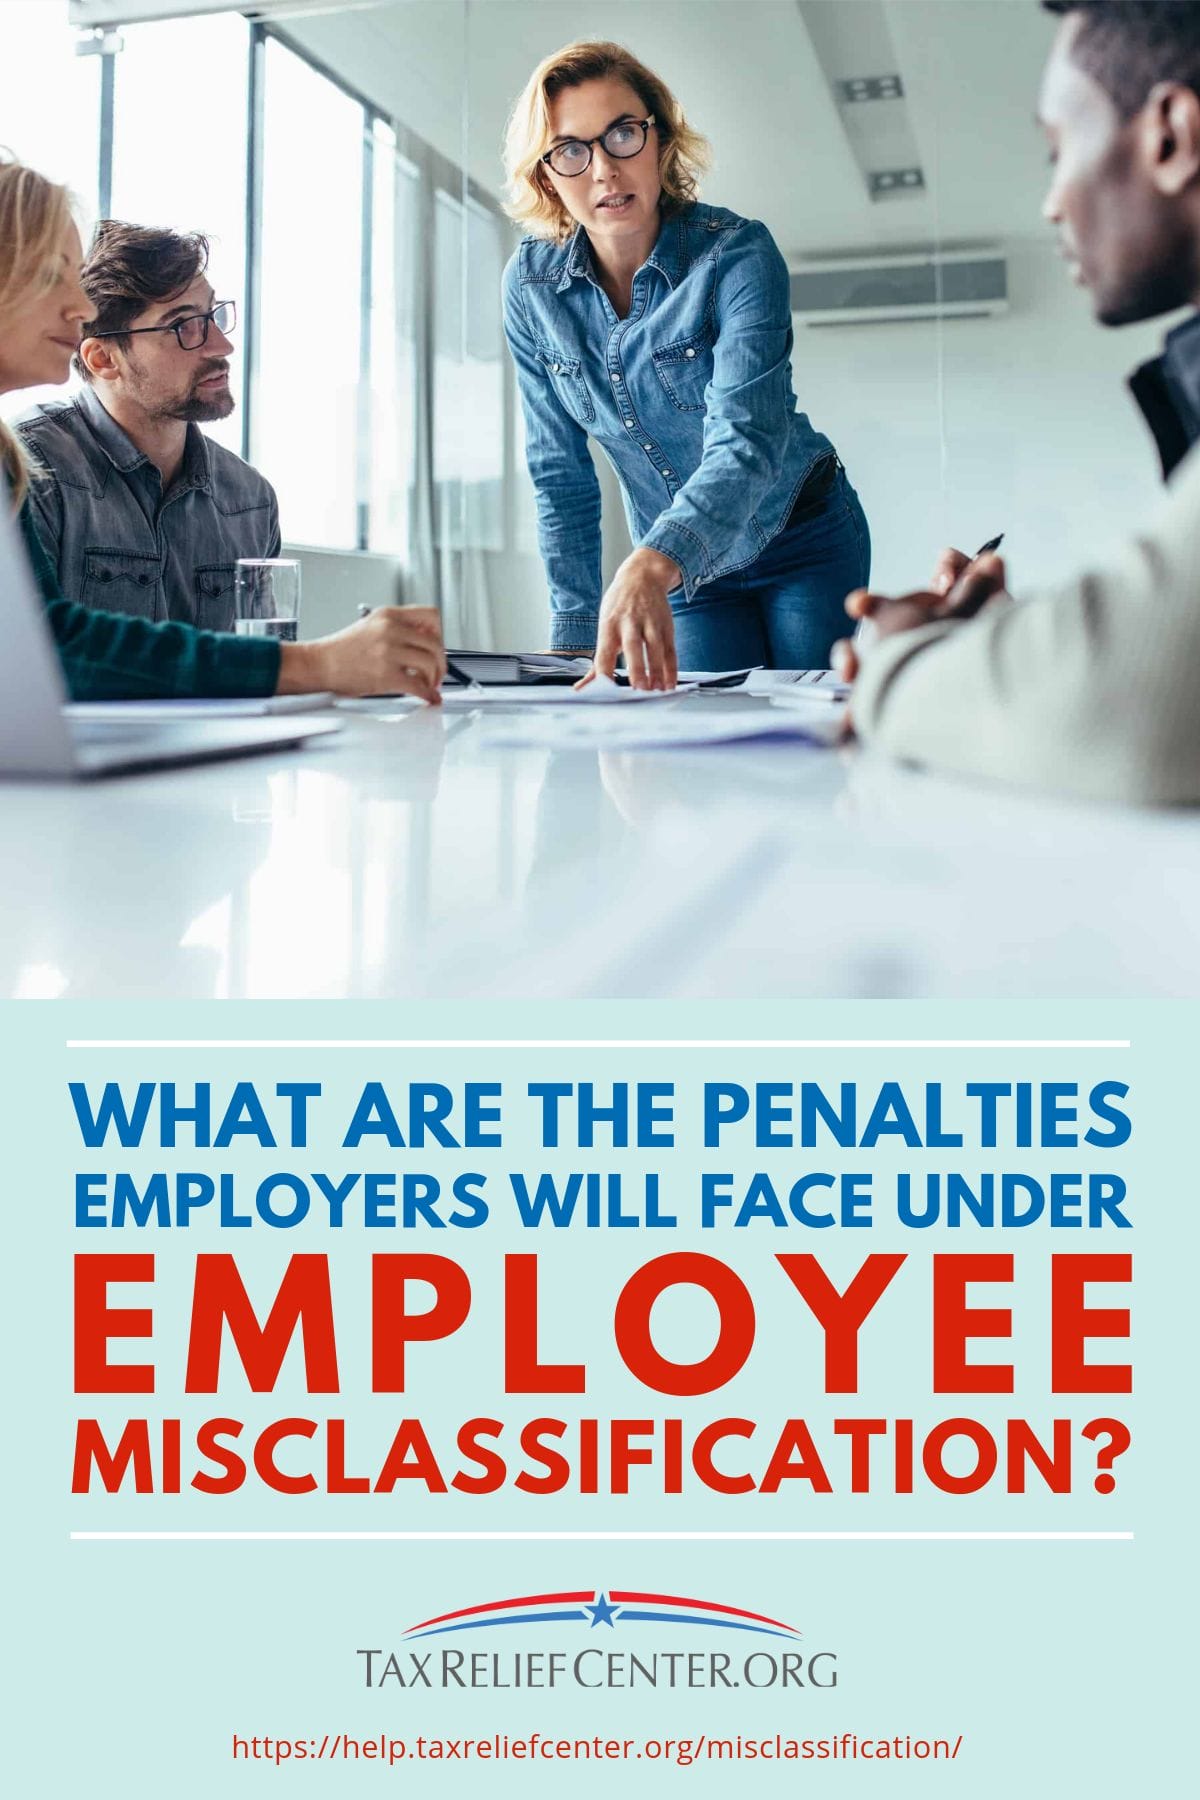 What Are The Penalties Employers Will Face Under Employee Misclassification? https://help.taxreliefcenter.org/misclassification/